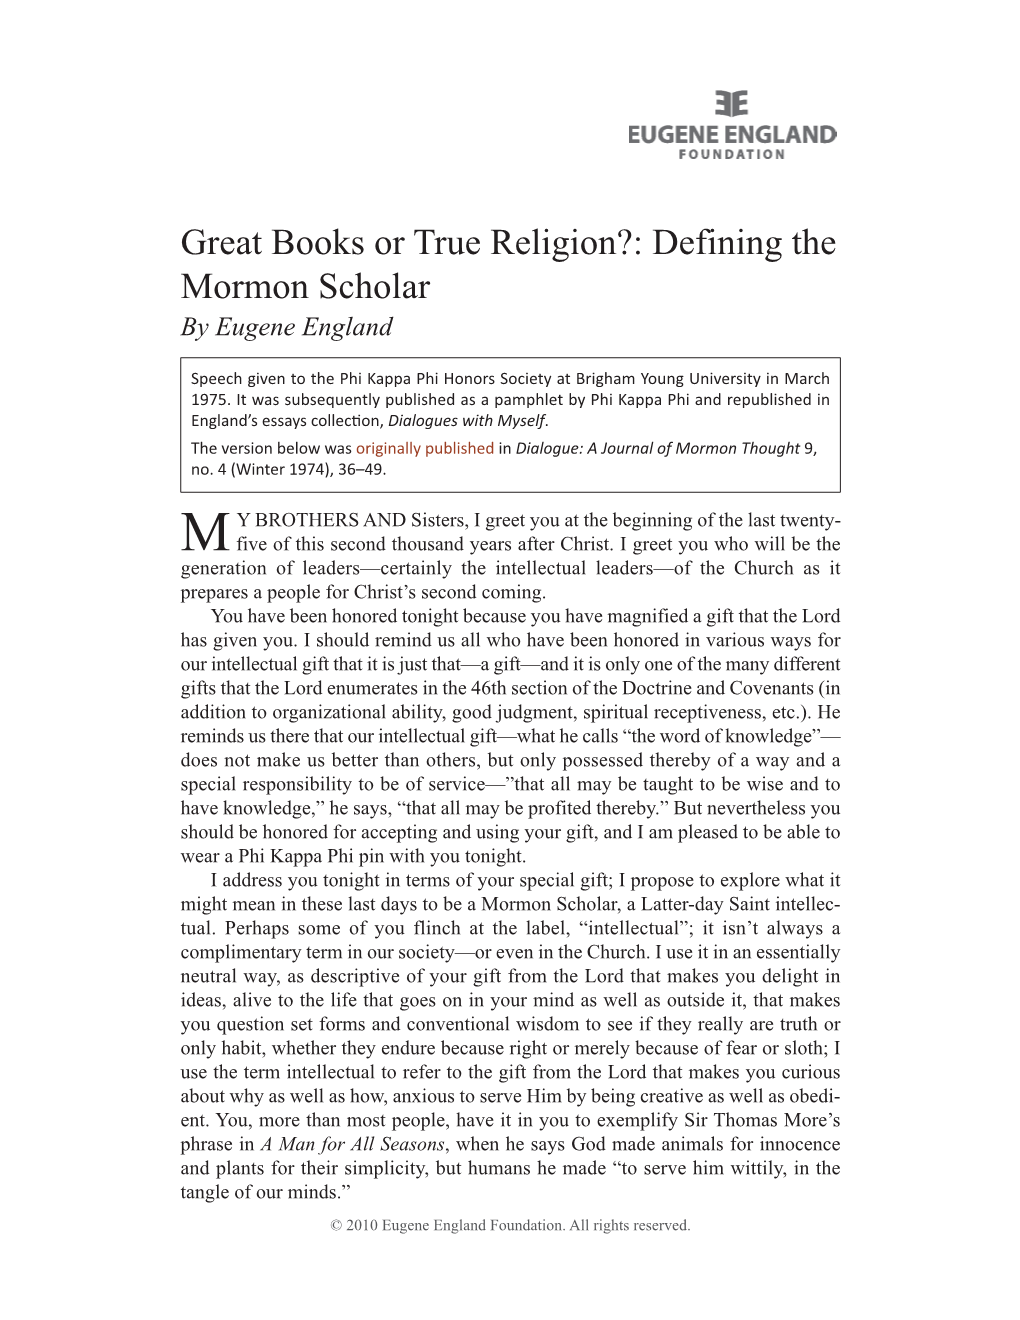 Great Books Or True Religion?: Defining the Mormon Scholar by Eugene England